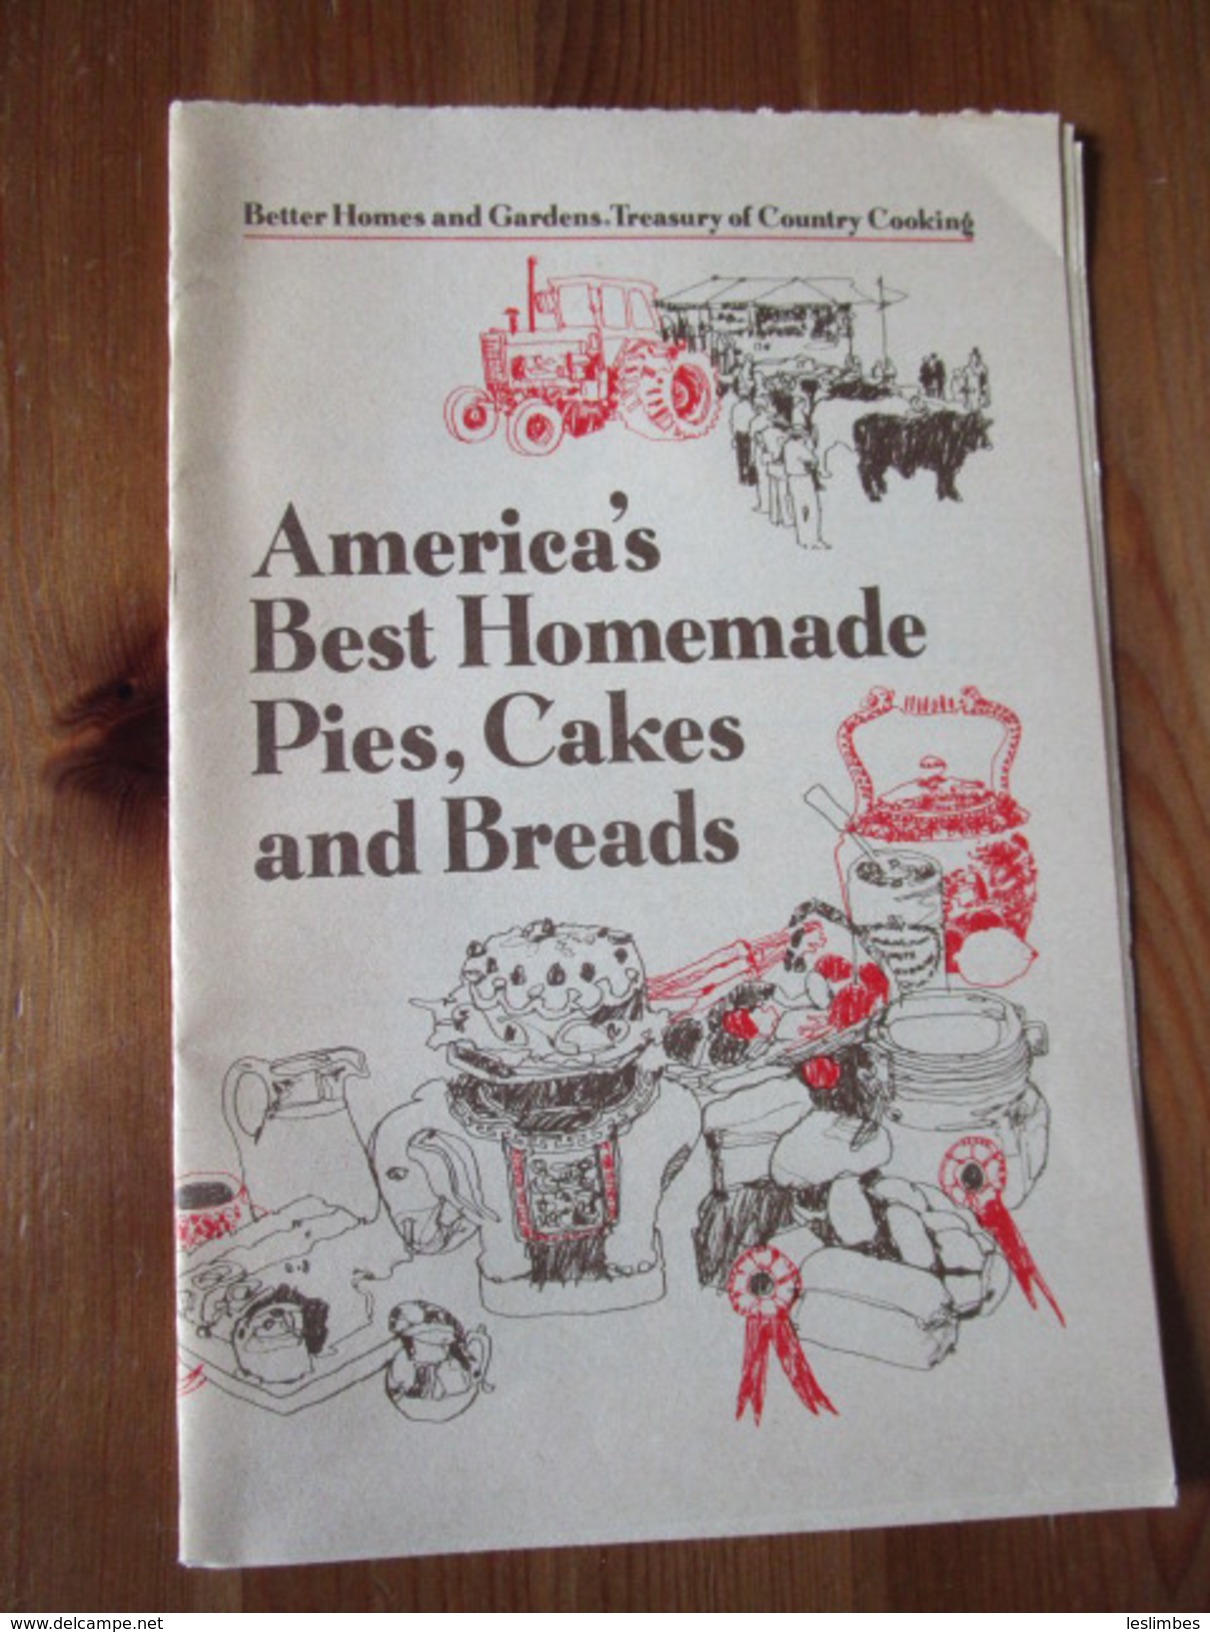 Better Homes And Gardens Treasury Of Country Cooking: America's Best Homemade Pies, Cakes And Breads - American (US)